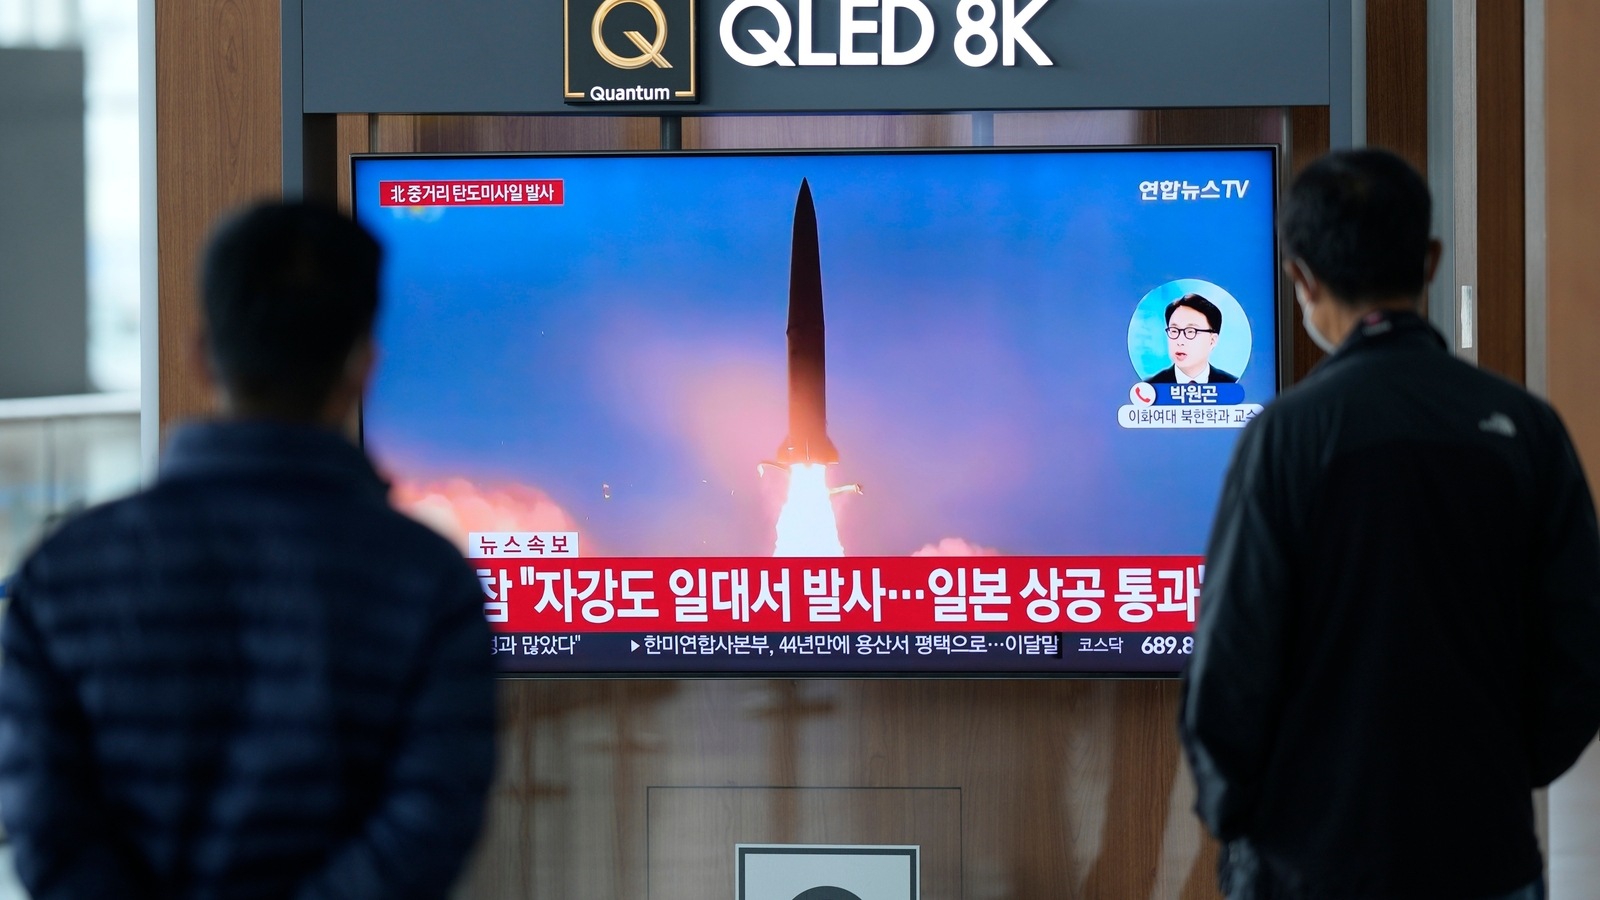 North Korea Fires Another Missile Toward Sea Says South Koreas